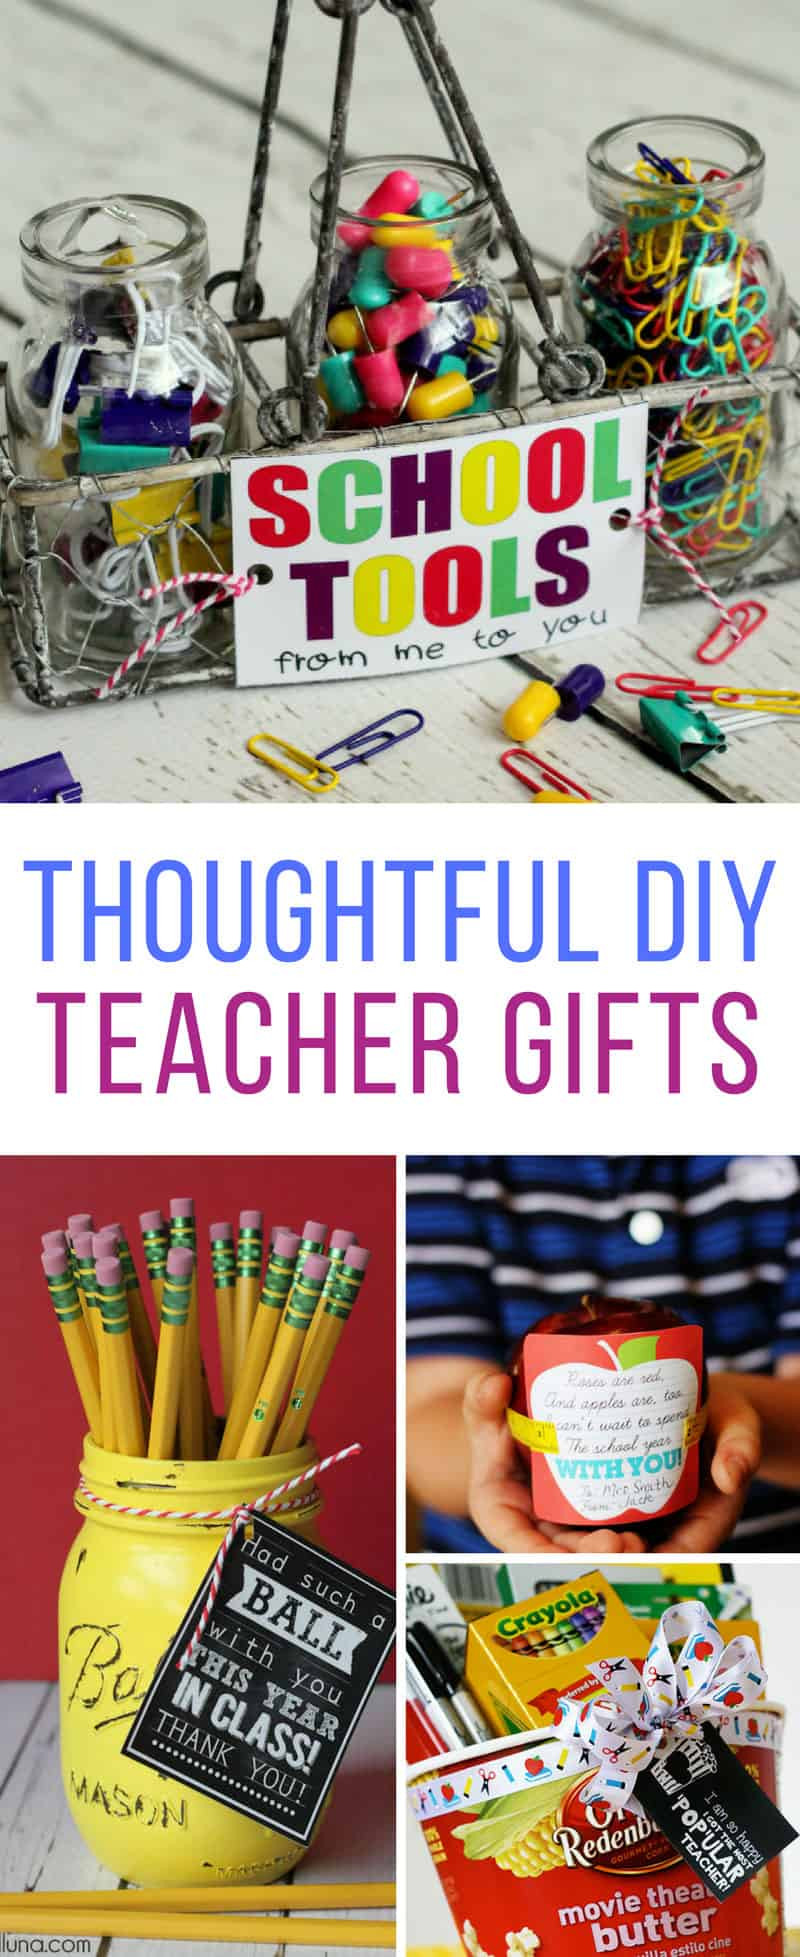 DIY Teachers Gifts
 DIY Back to School Teacher Gifts That Are Super CUTE